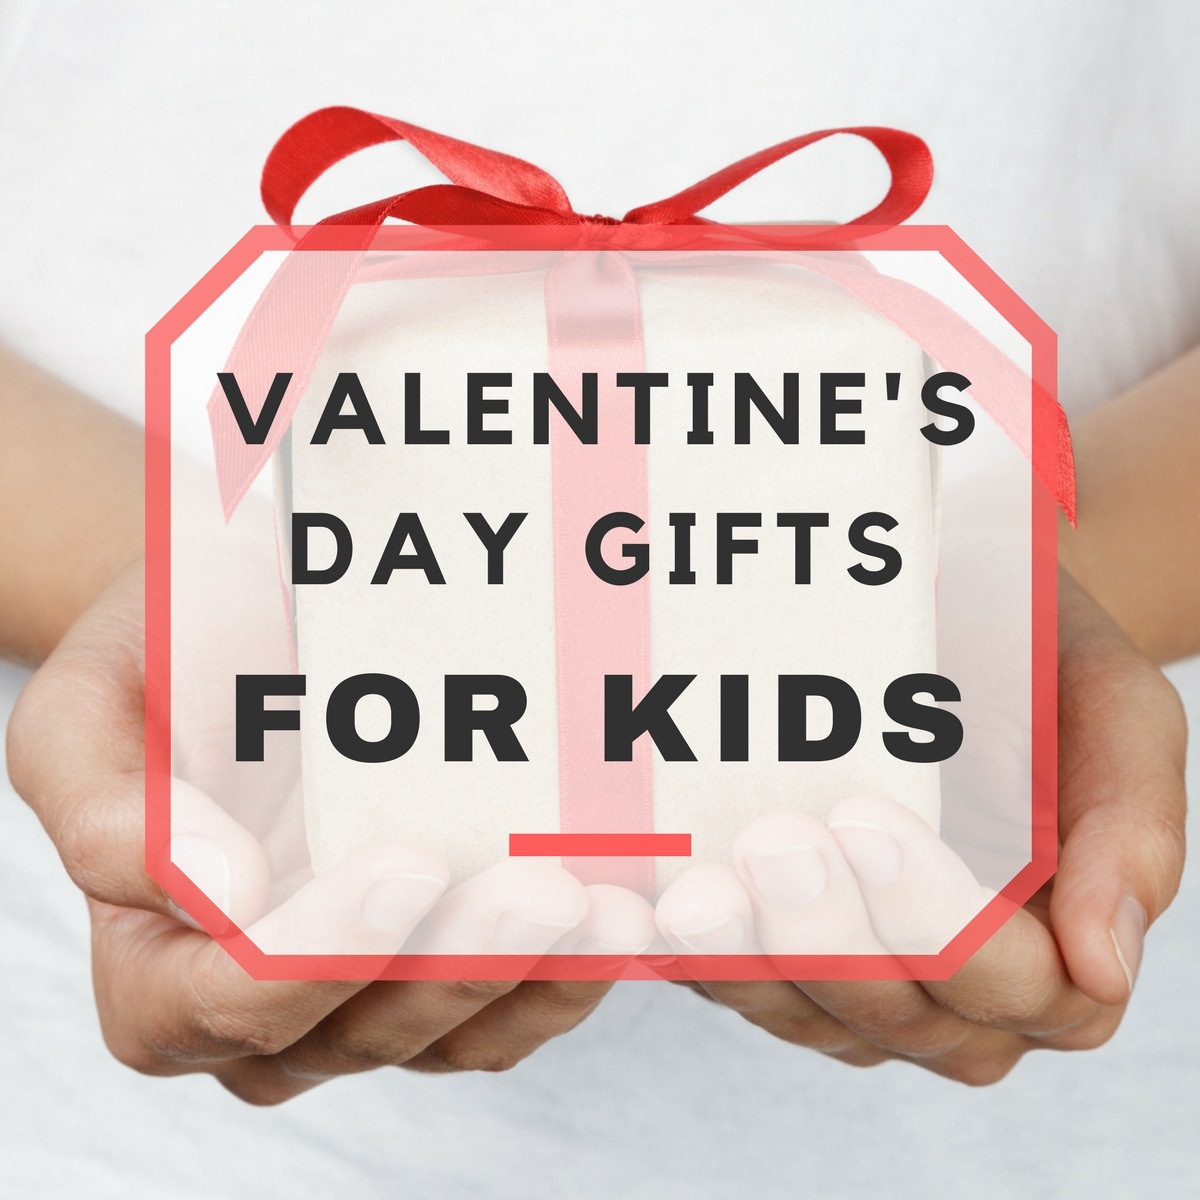 Cute Valentine’s Day Gift Ideas for Kids